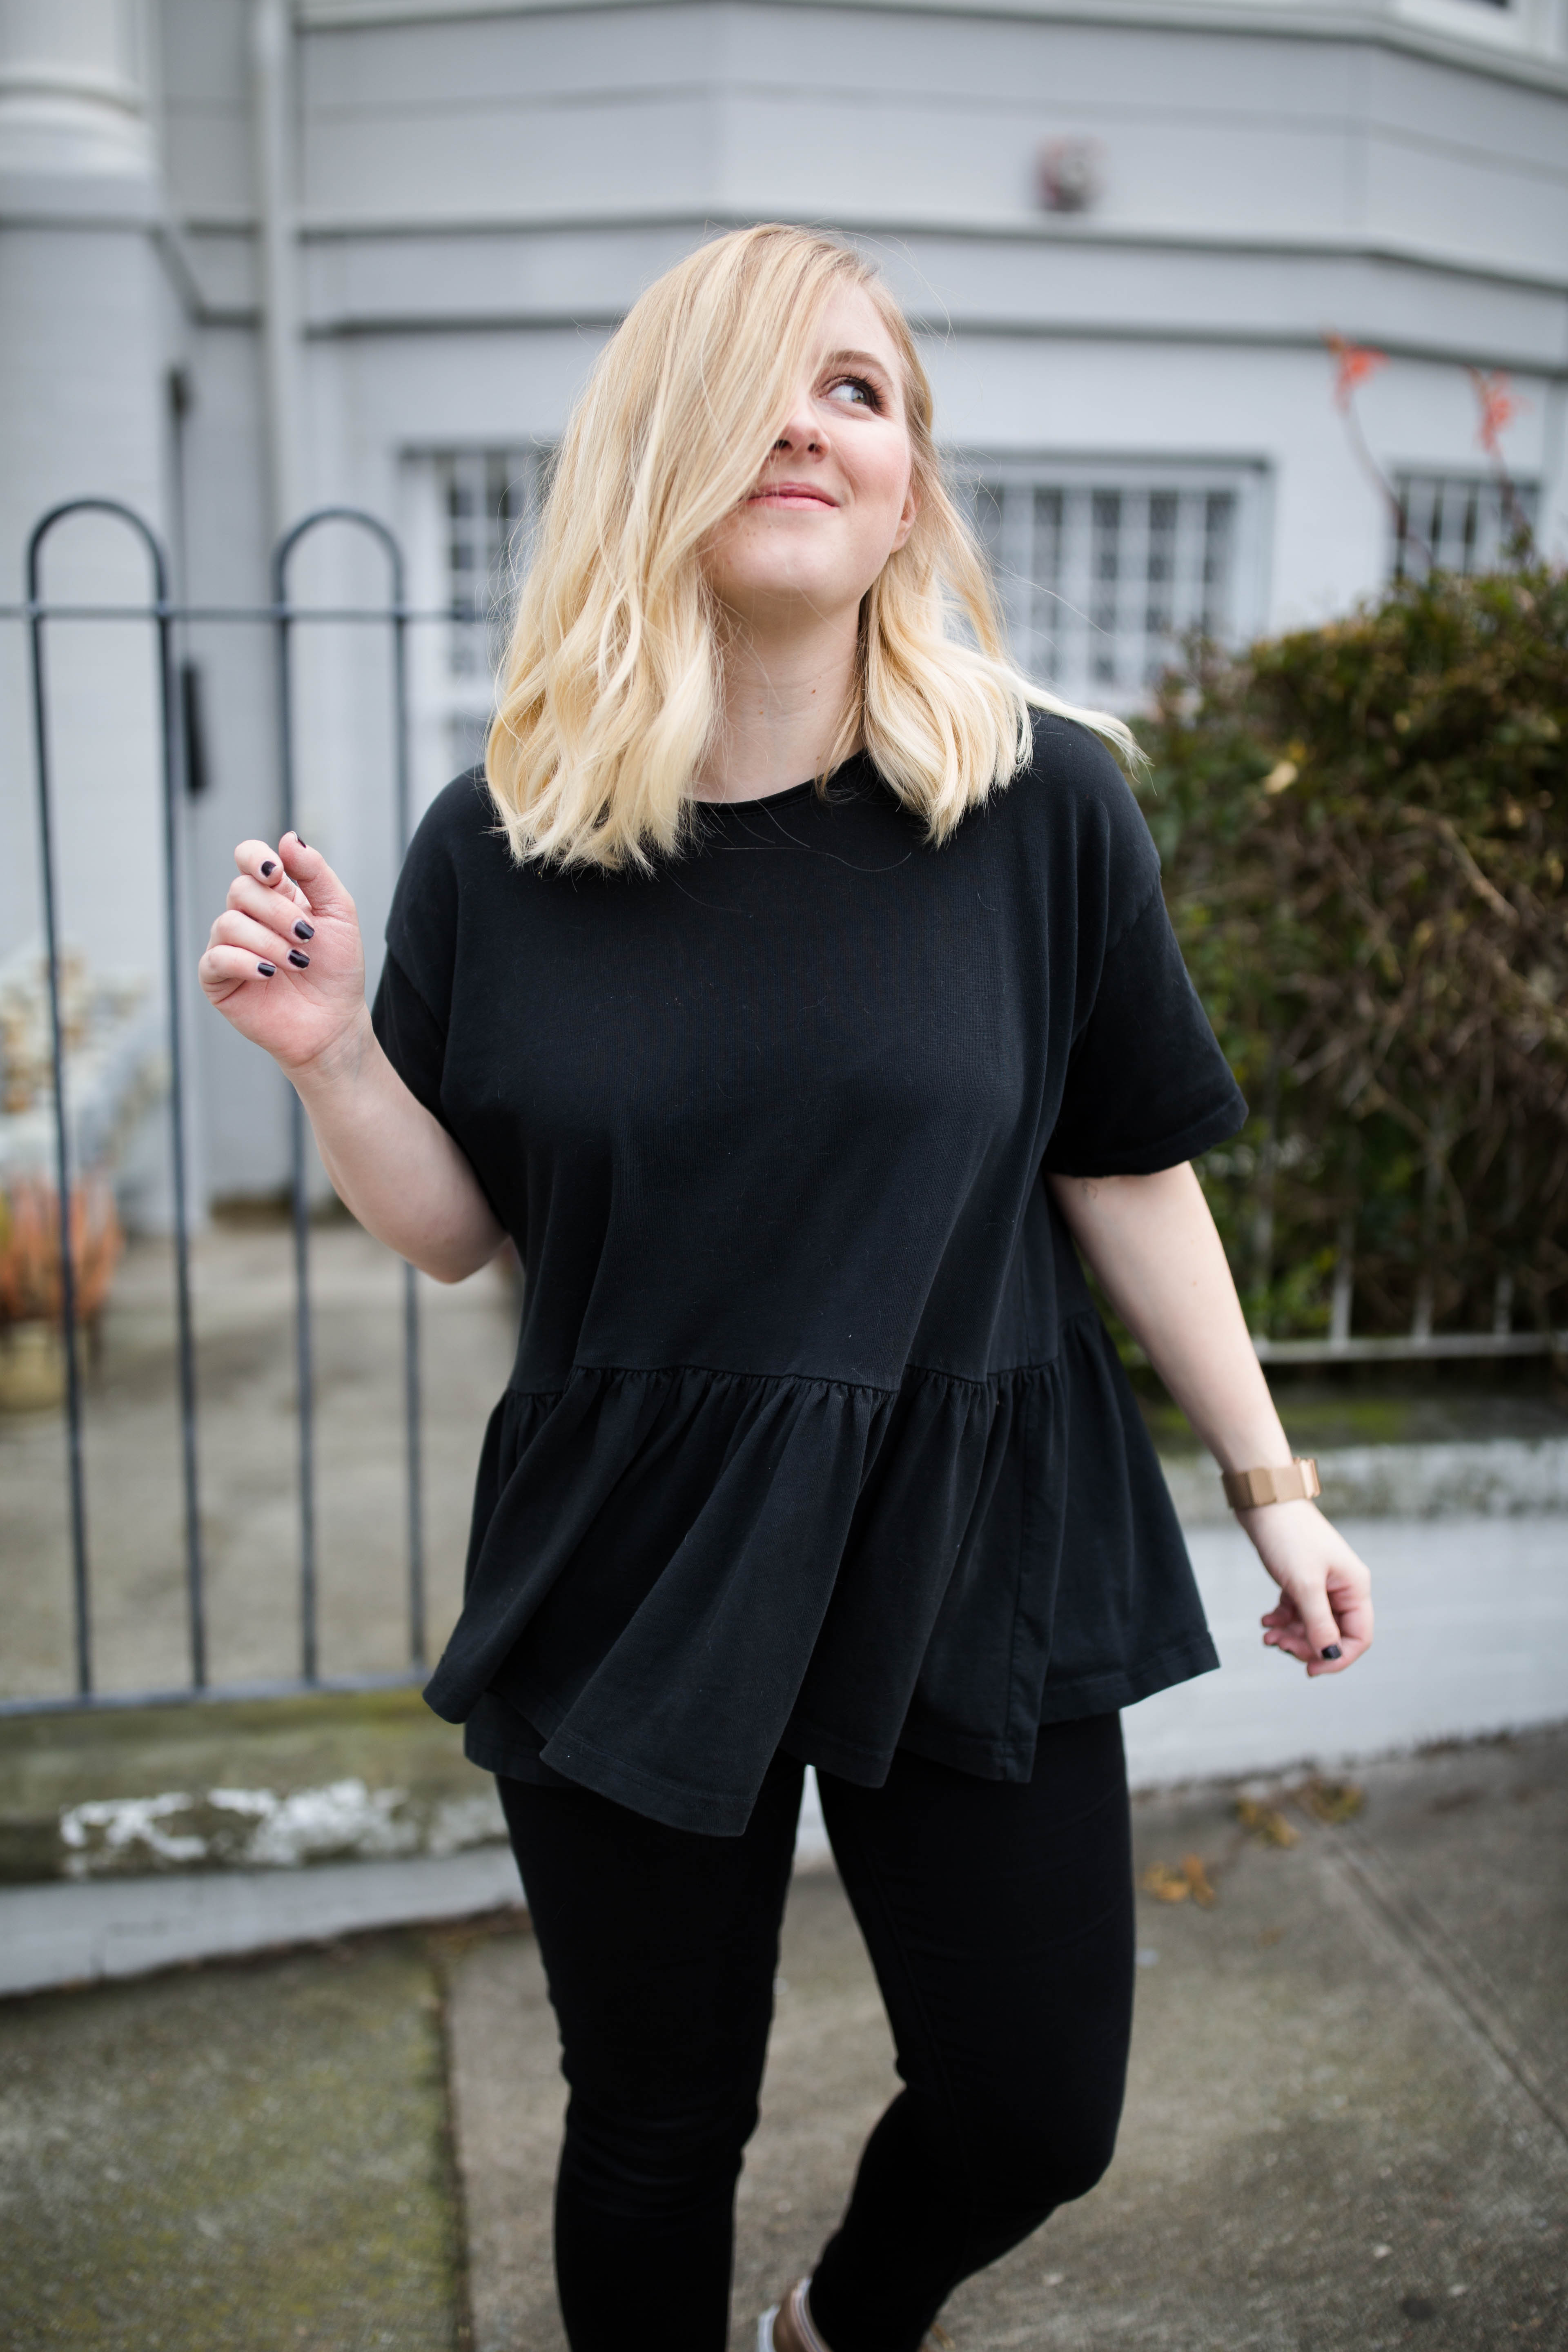 Learn how to style an all black outfit!